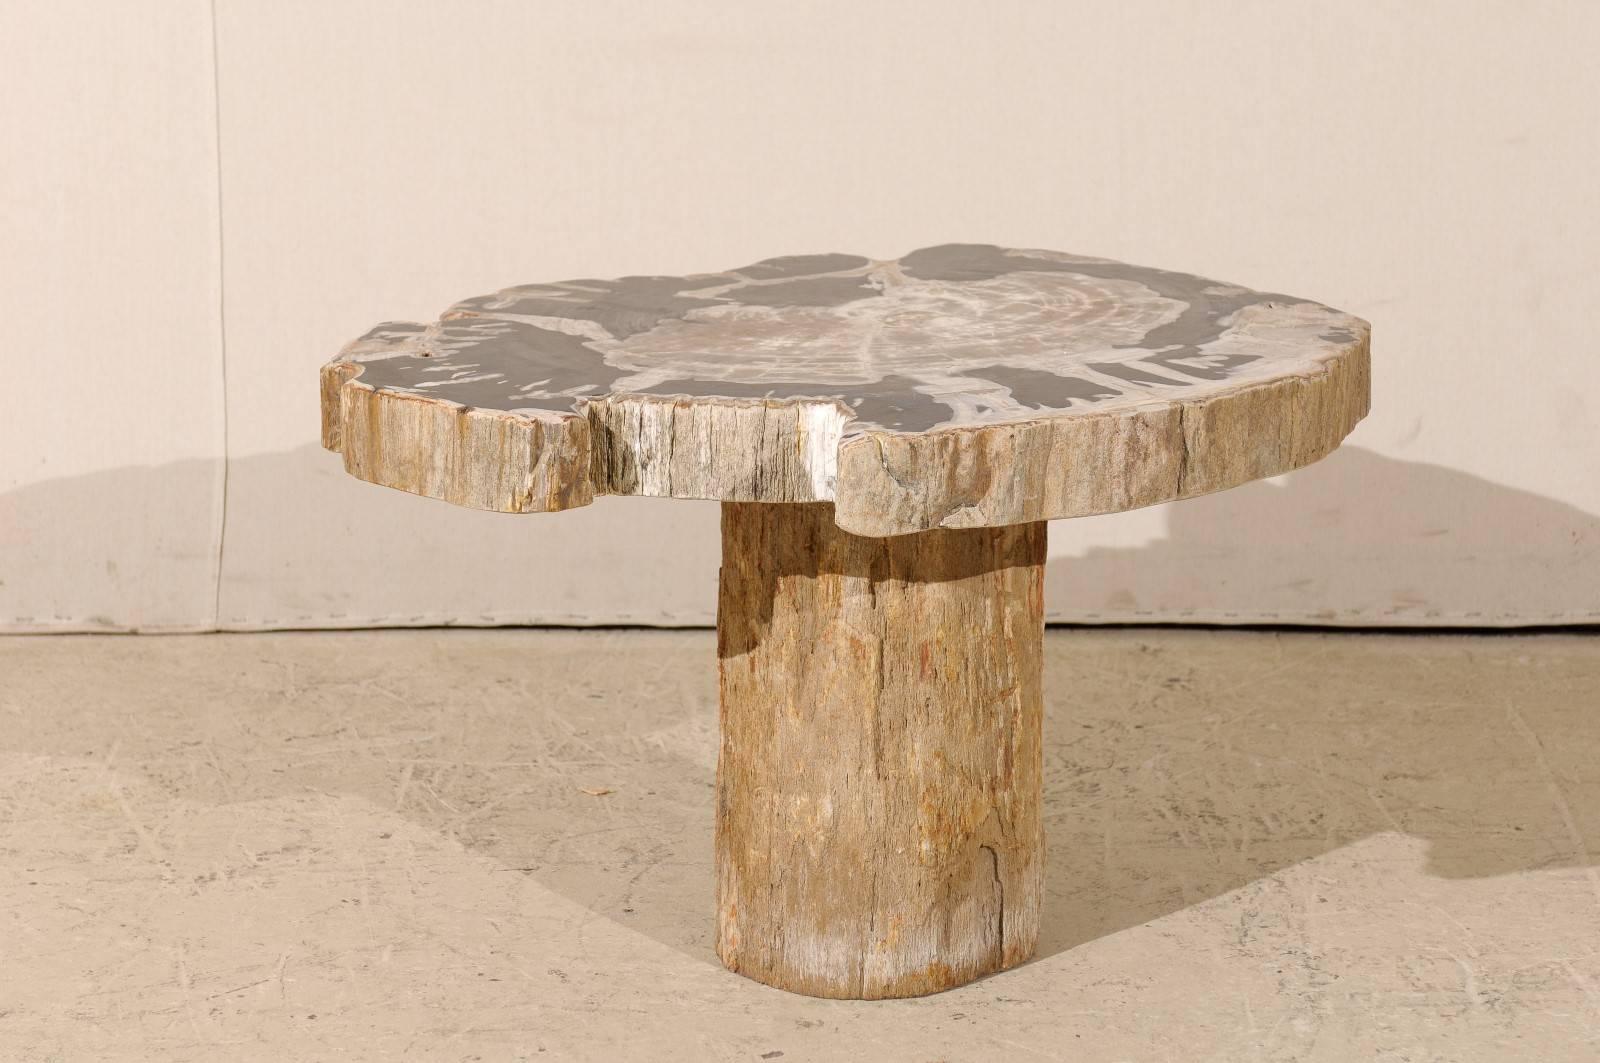 A petrified wood coffee, drink or side table. This cute sized petrified wood table has a wonderful top with a nice, natural shape and sleek colors. These colors include black, white, grey, tan and warm brown. This piece would work really well in a